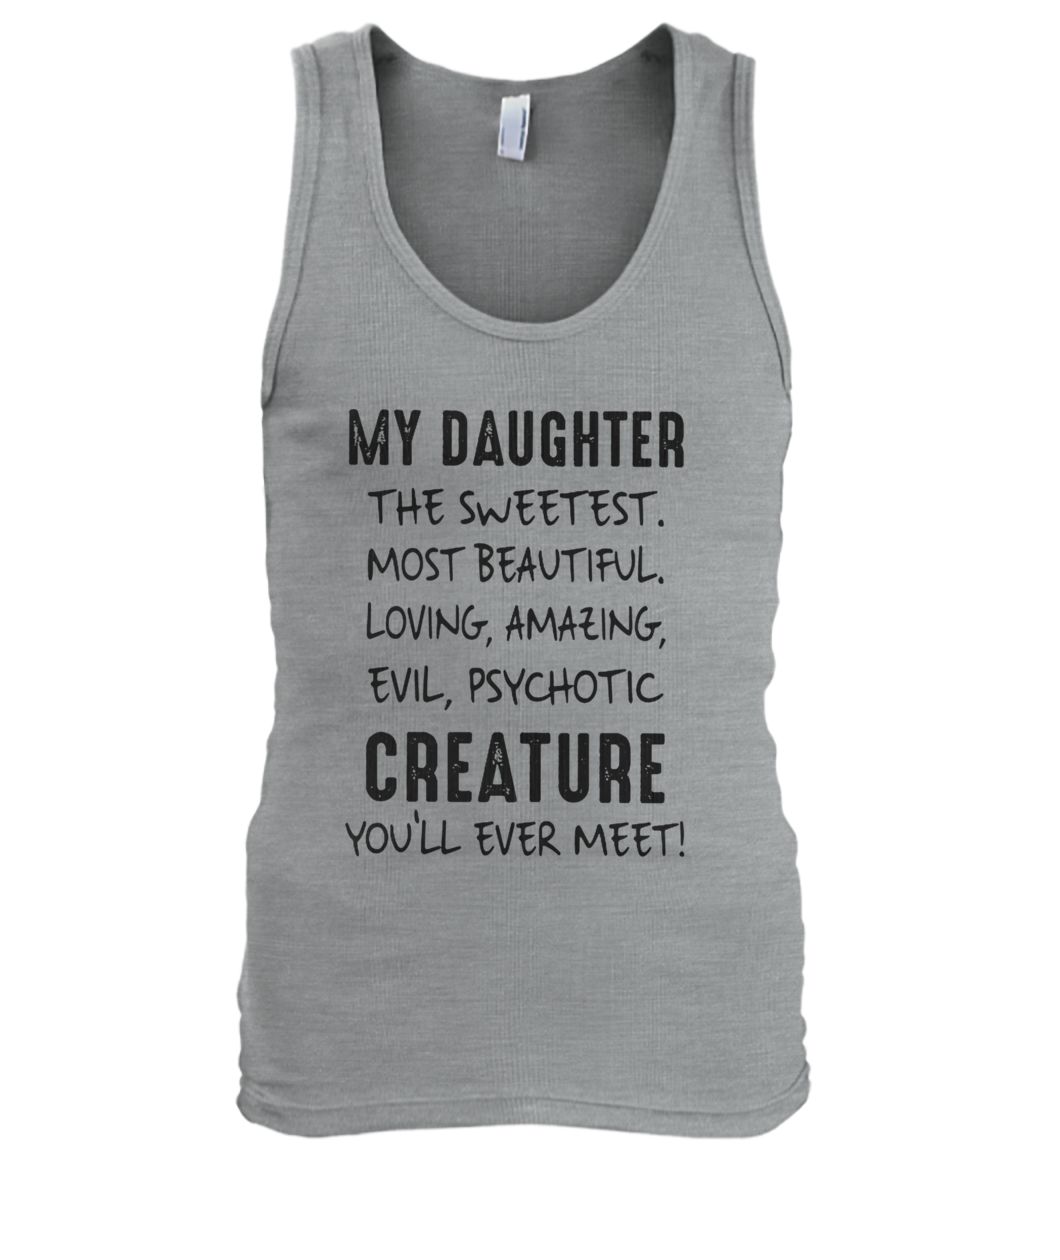 My daughter the sweetest most beautiful loving amazing evil psychotic creature you'll ever meet men's tank top